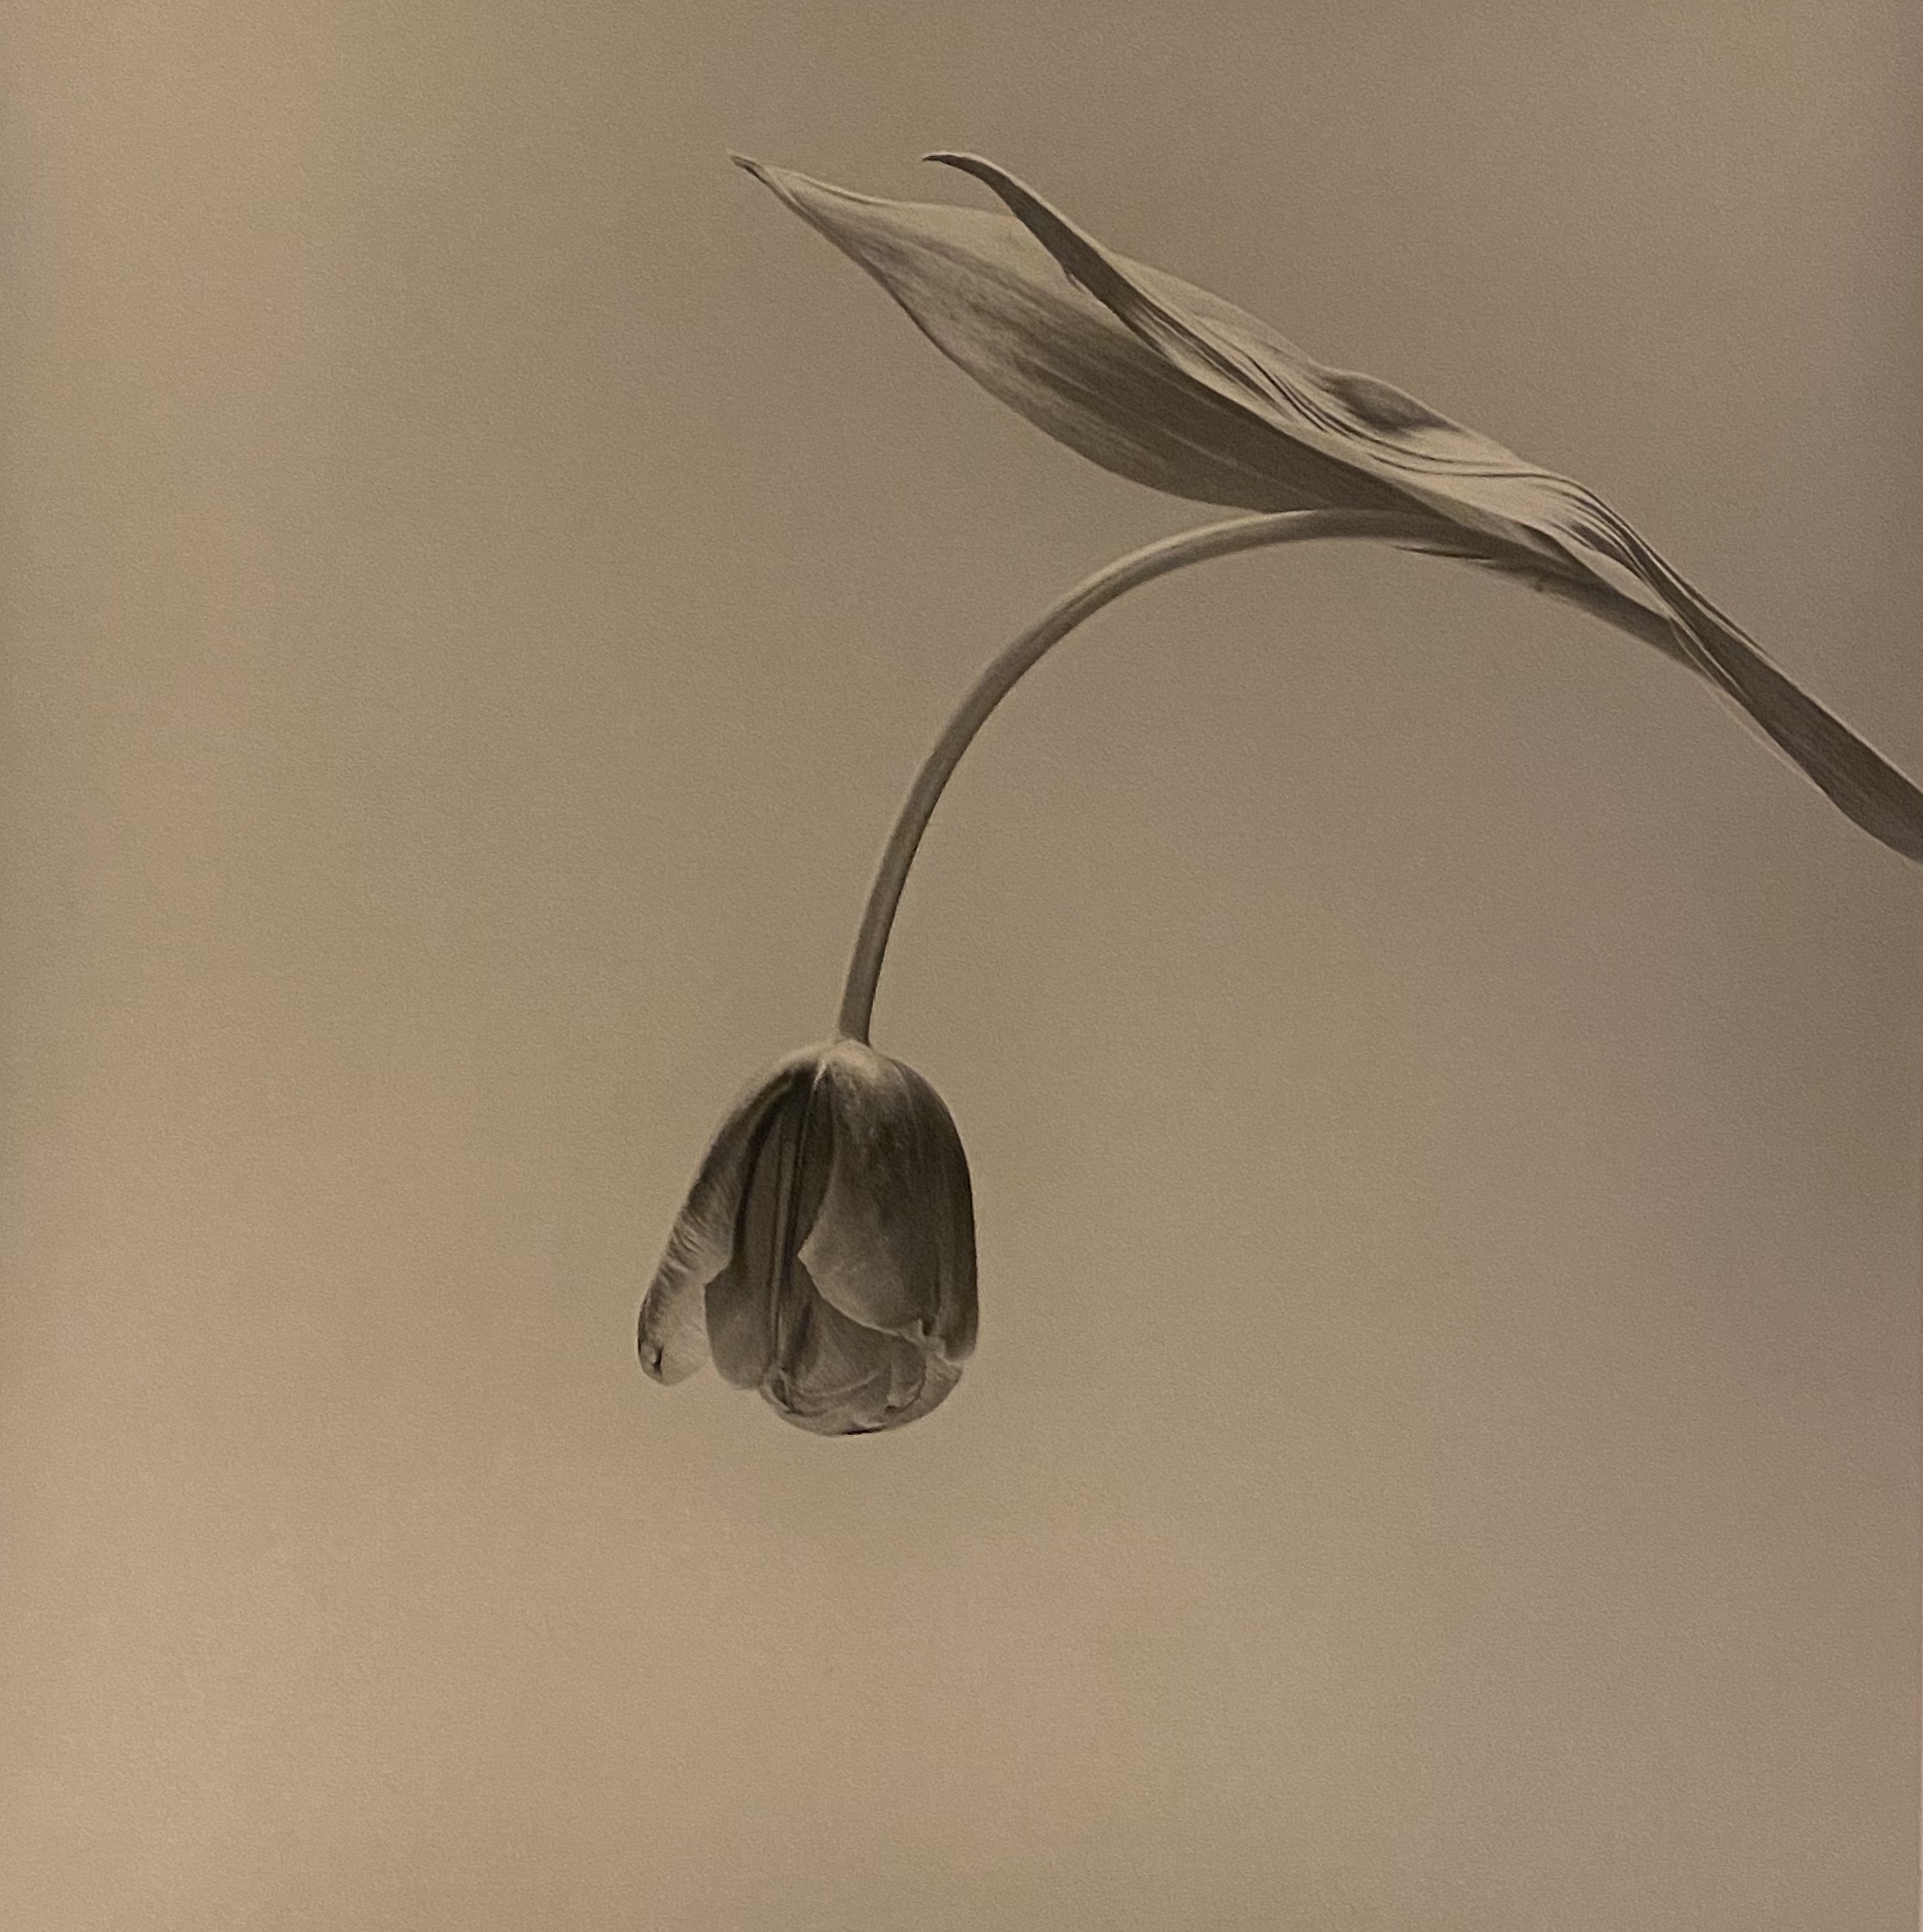 A single tulip, arcing down towards the ground on a midtone gray background